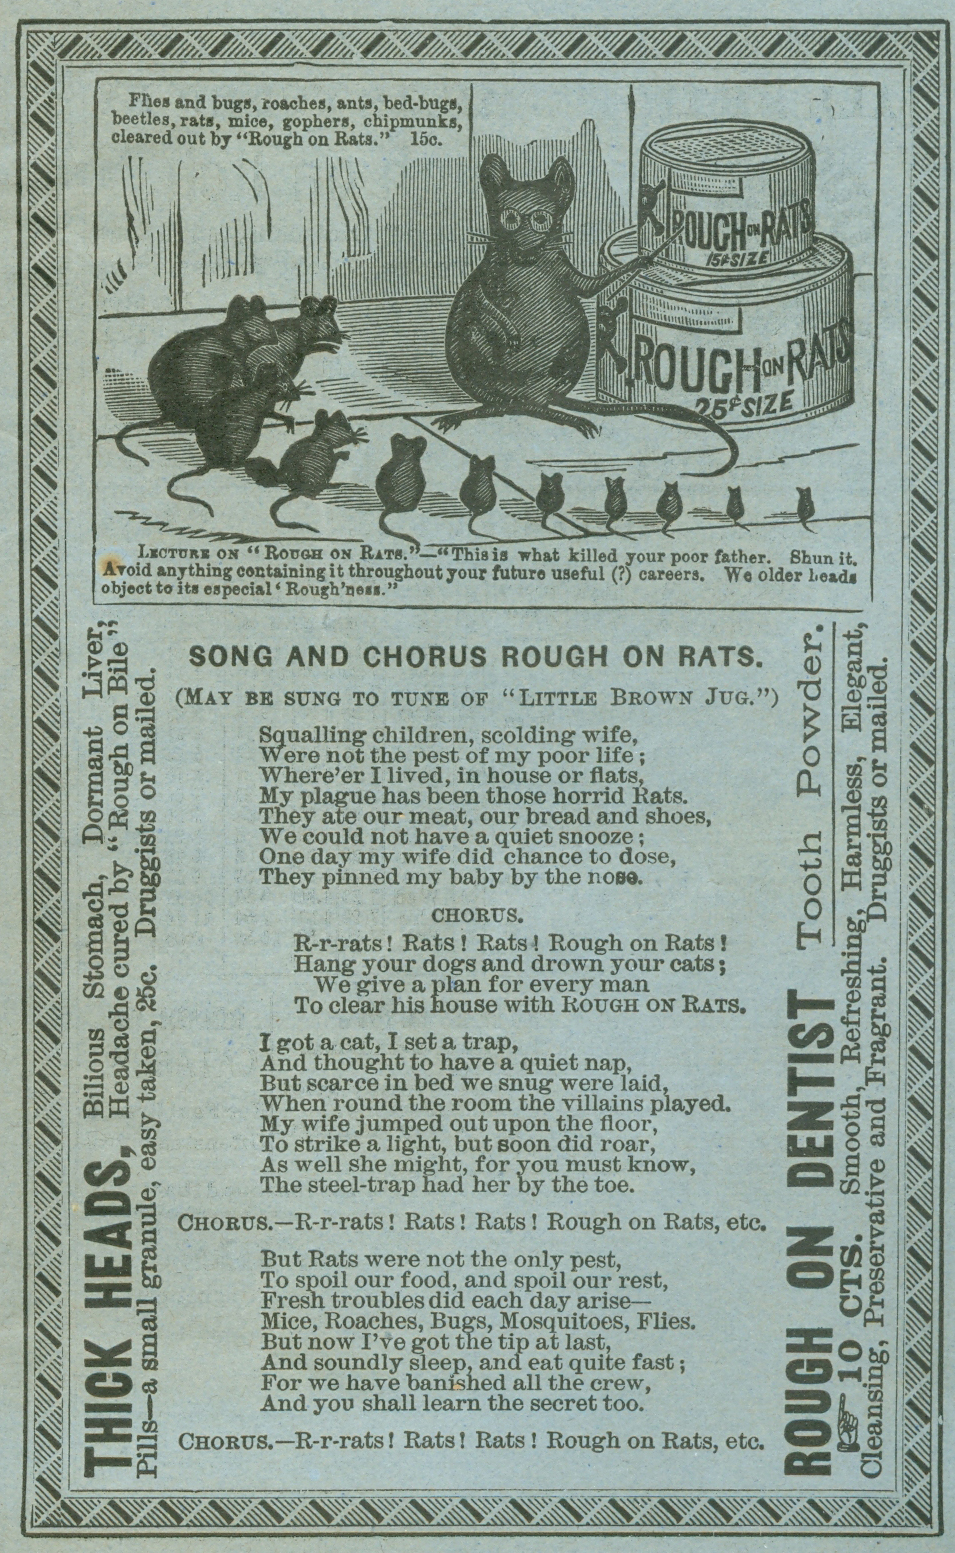 However, if you prefer music to literature, how about a Rough on Rats song?